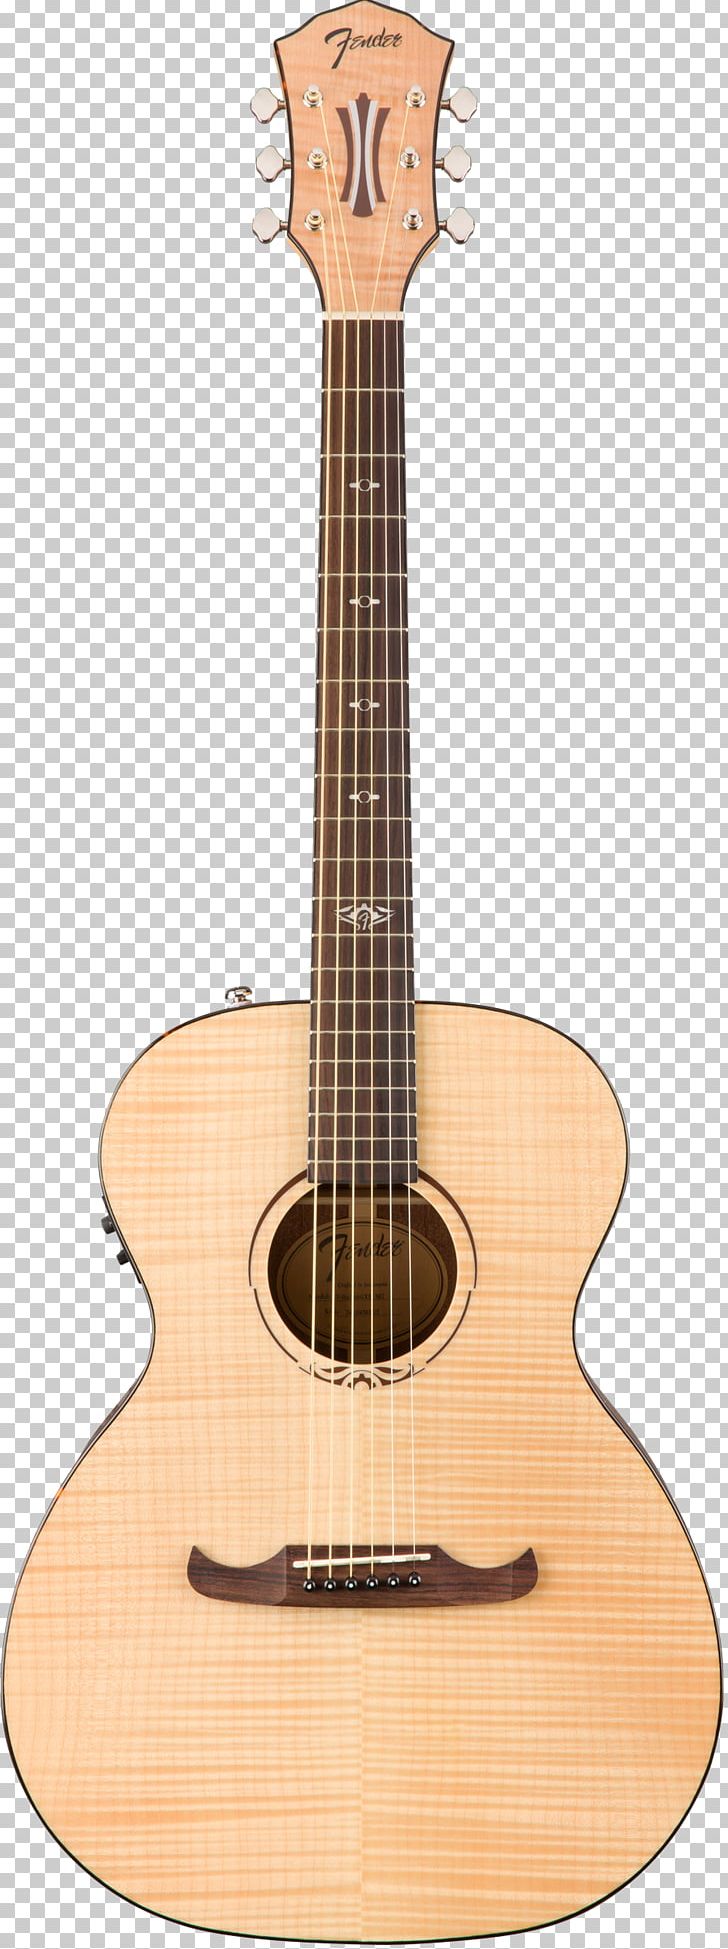 Acoustic-electric Guitar Steel-string Acoustic Guitar Flame Maple Musical Instruments PNG, Clipart, Acoustic Electric Guitar, Cuatro, Cutaway, Guitar Accessory, Objects Free PNG Download